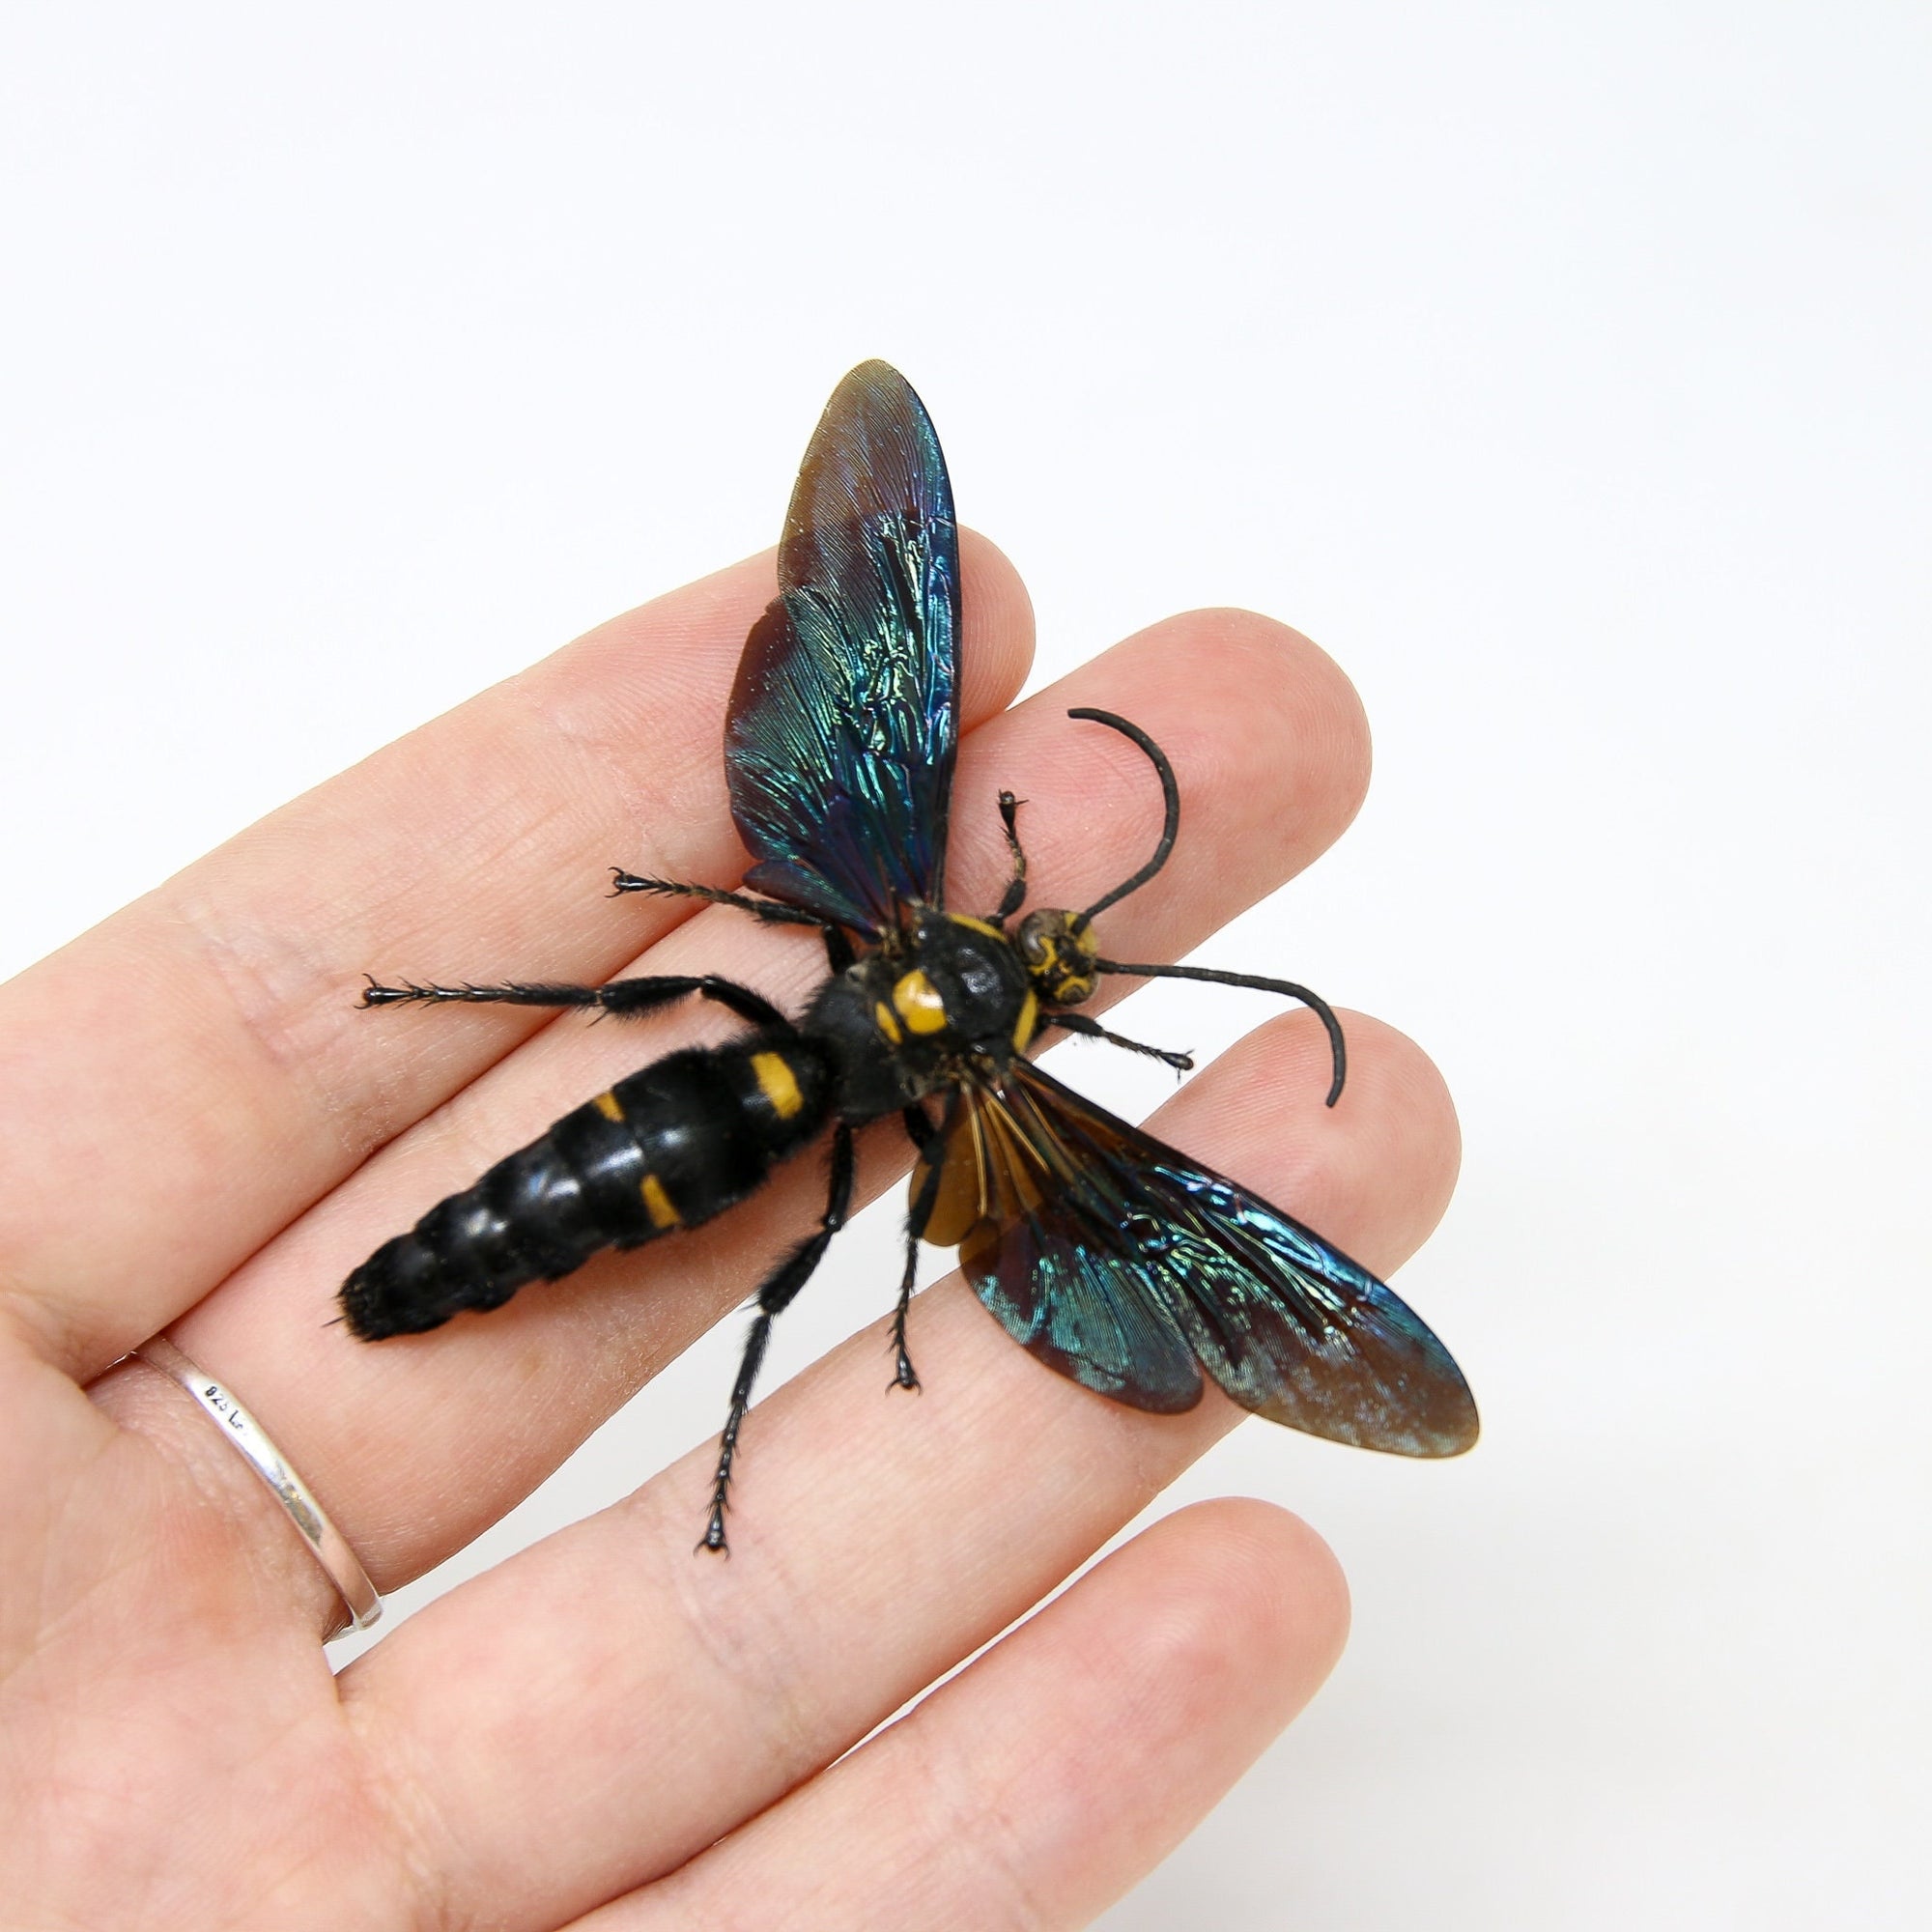 Giant Scoliid Wasp WINGS-SPREAD (Megascolia procer)  Entomology Taxidermy